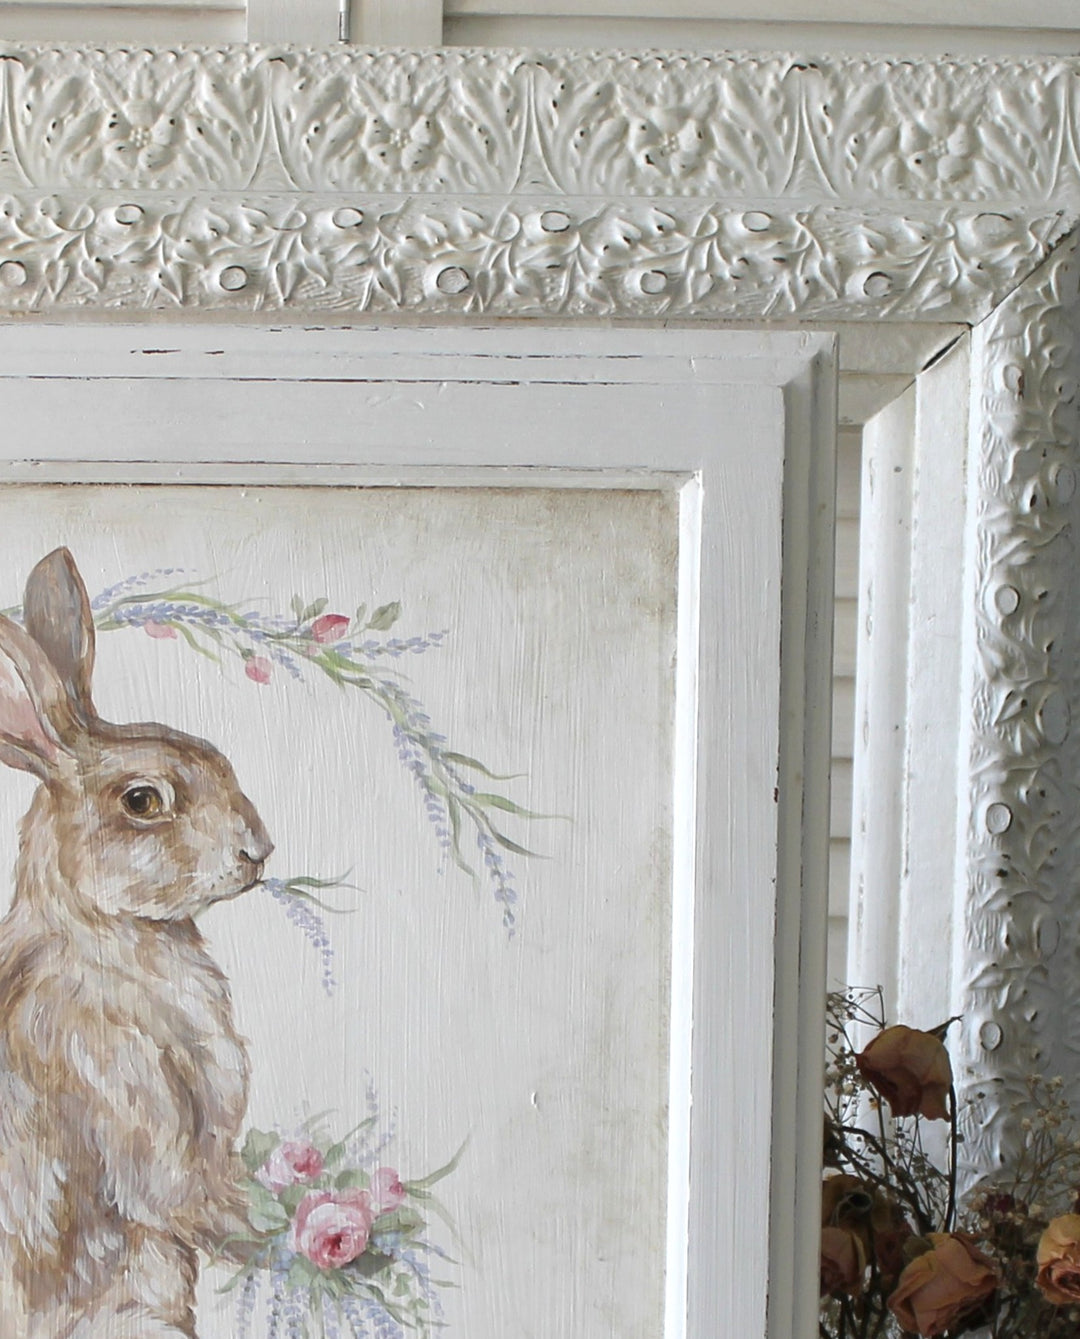 Shabby Chic Vintage Bunny With Roses and Lavender Wood Pannel Wall Art by Debi Coules